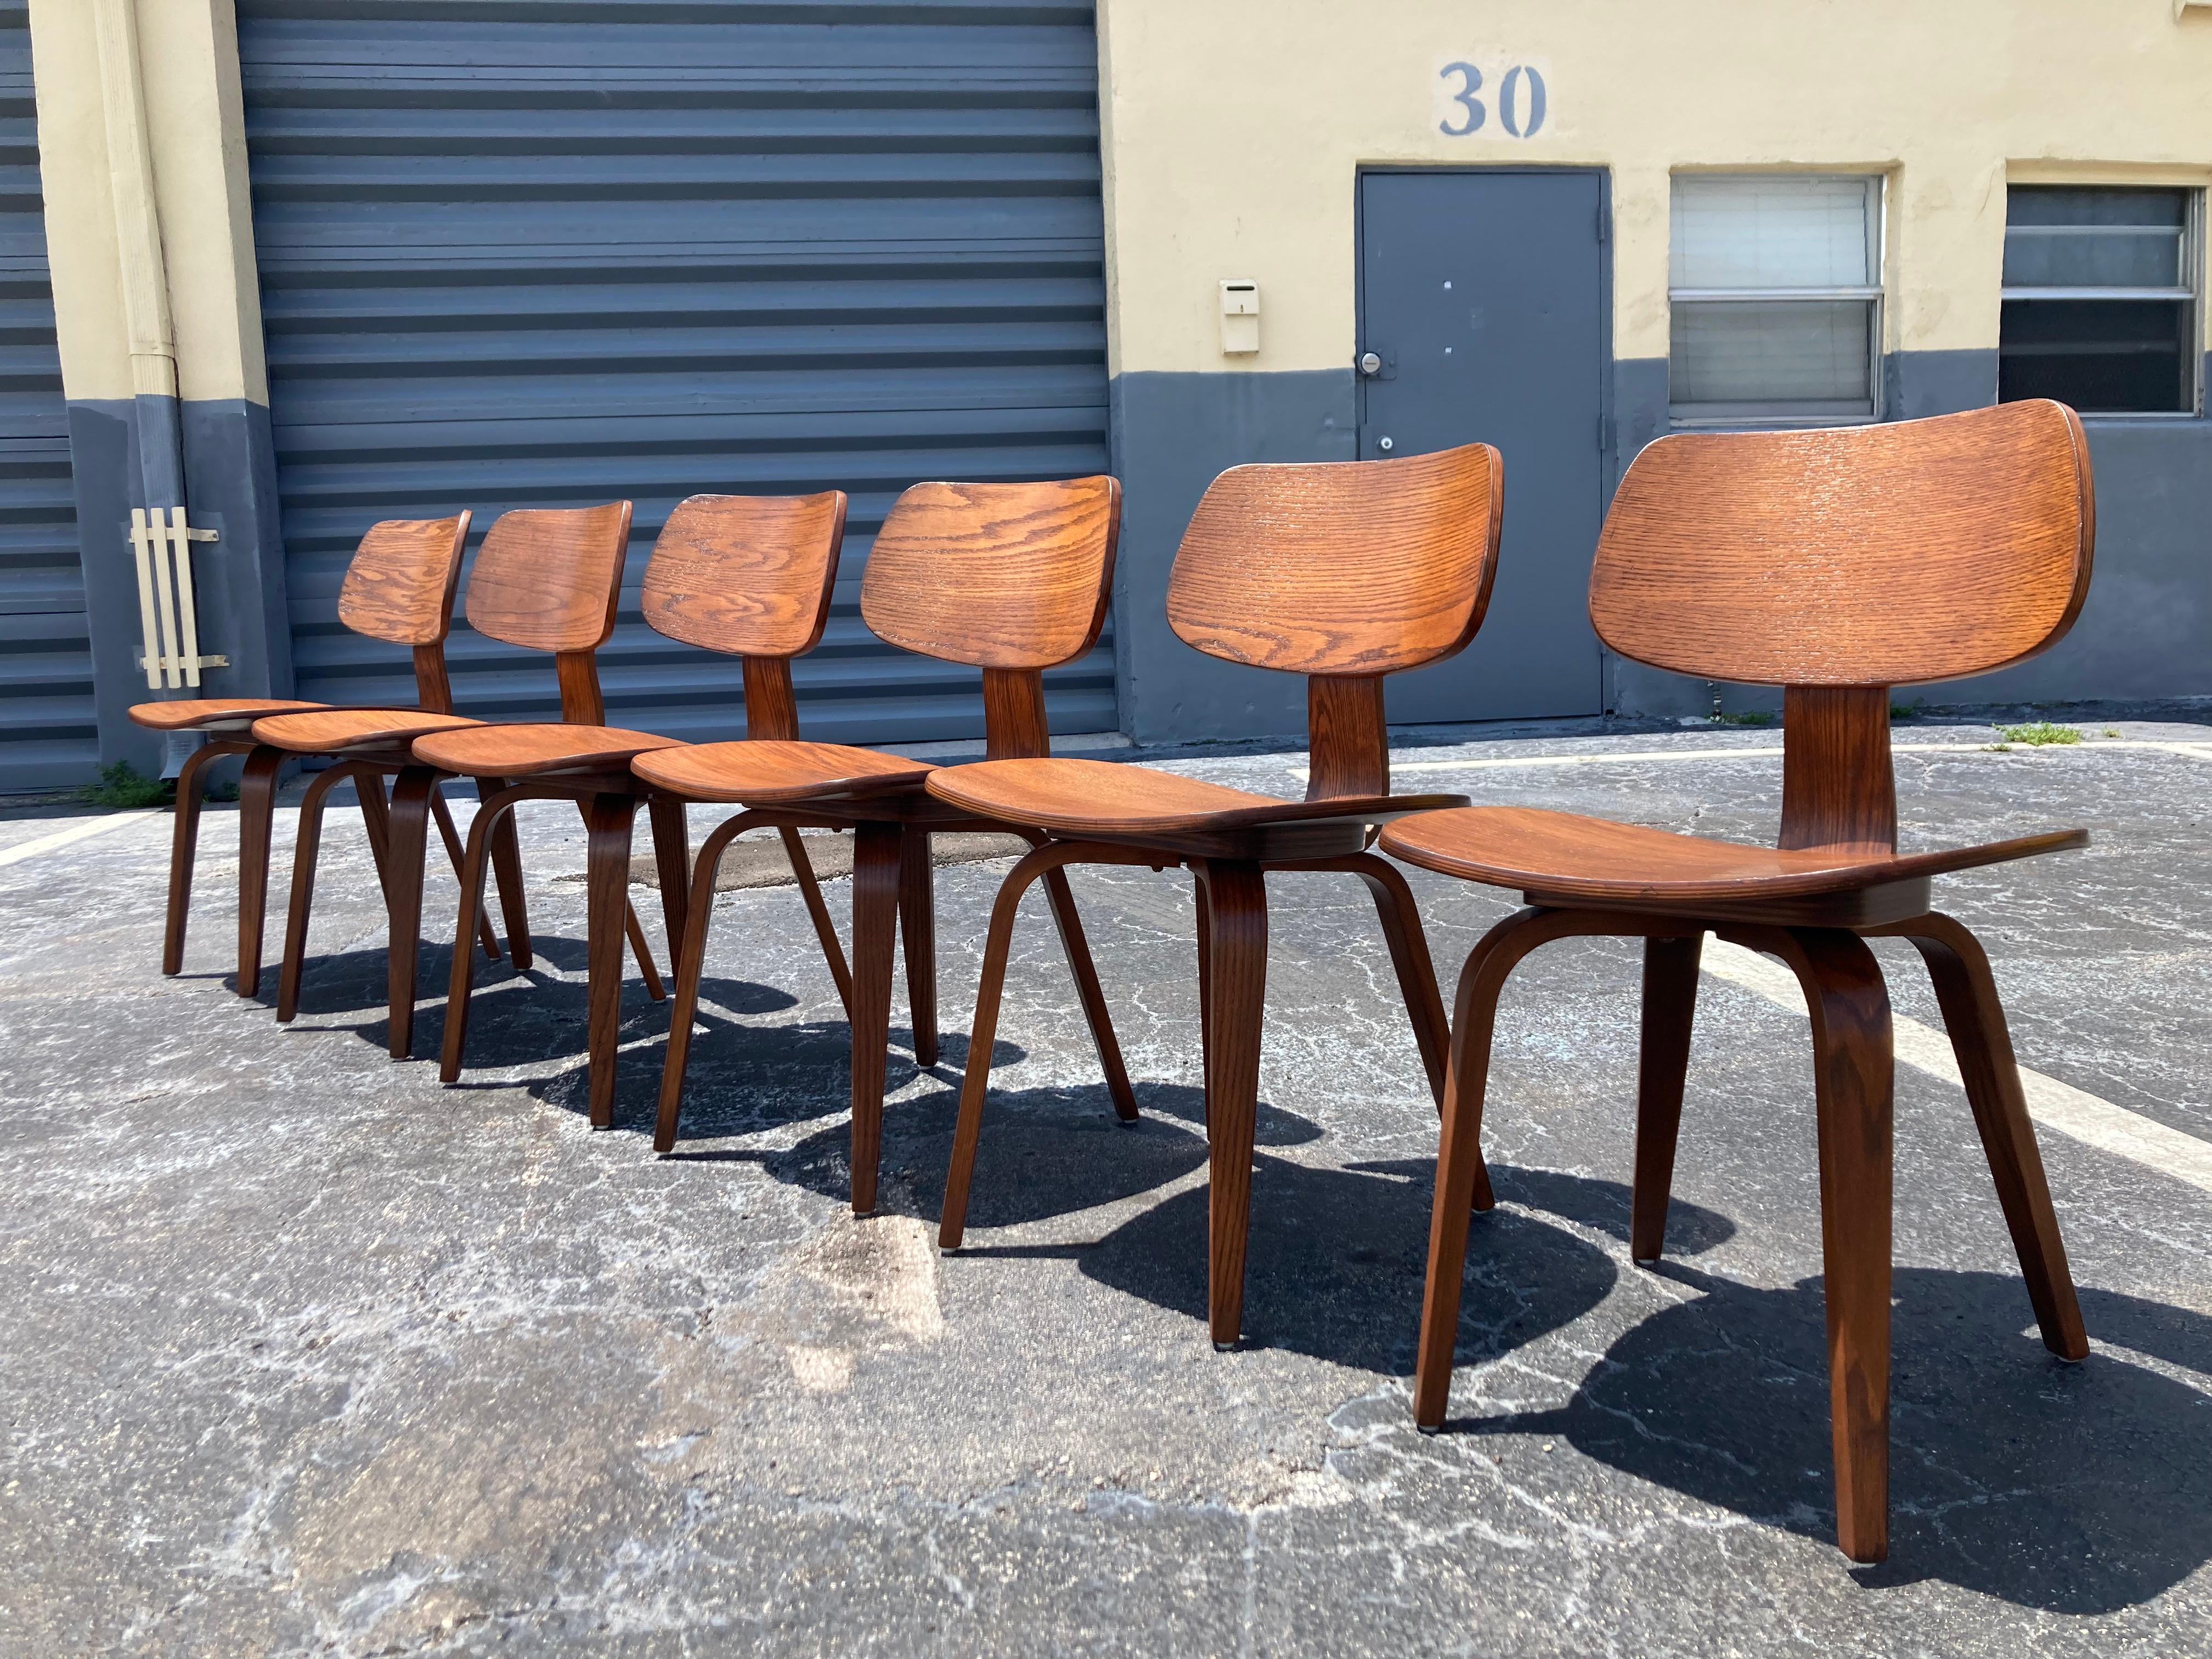 Set of Six Dining Chairs Designed by Bruno Weil for Thonet in the 1960s, oak plywood with a walnut lacquer finish. Ready for a new home, we have another set available.